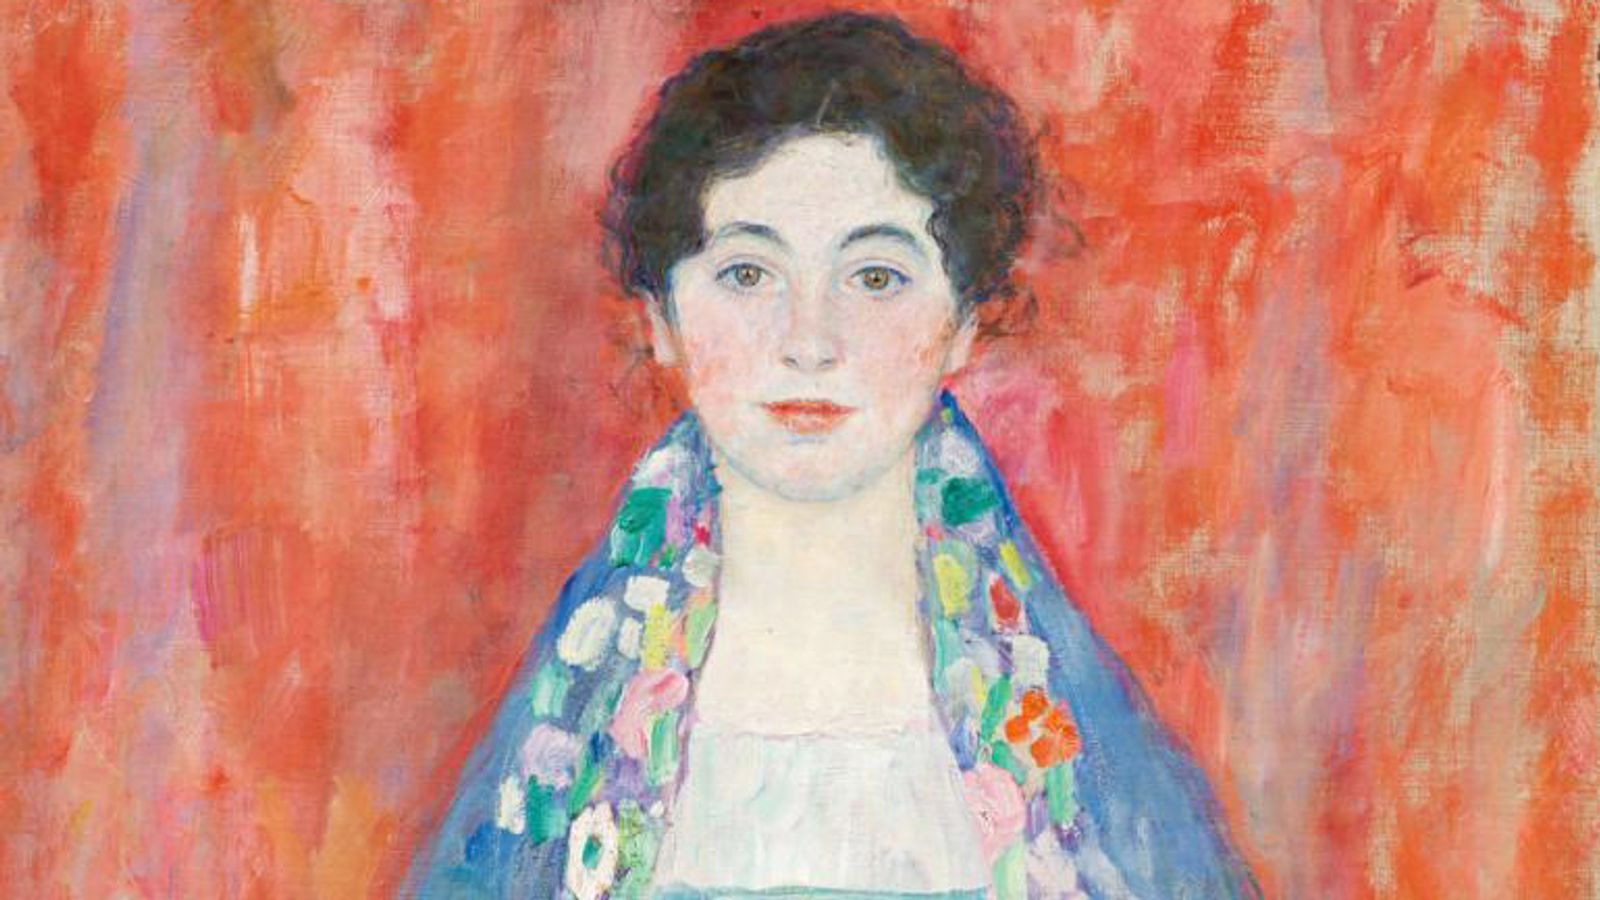 lost klimt painting found after almost 100 years